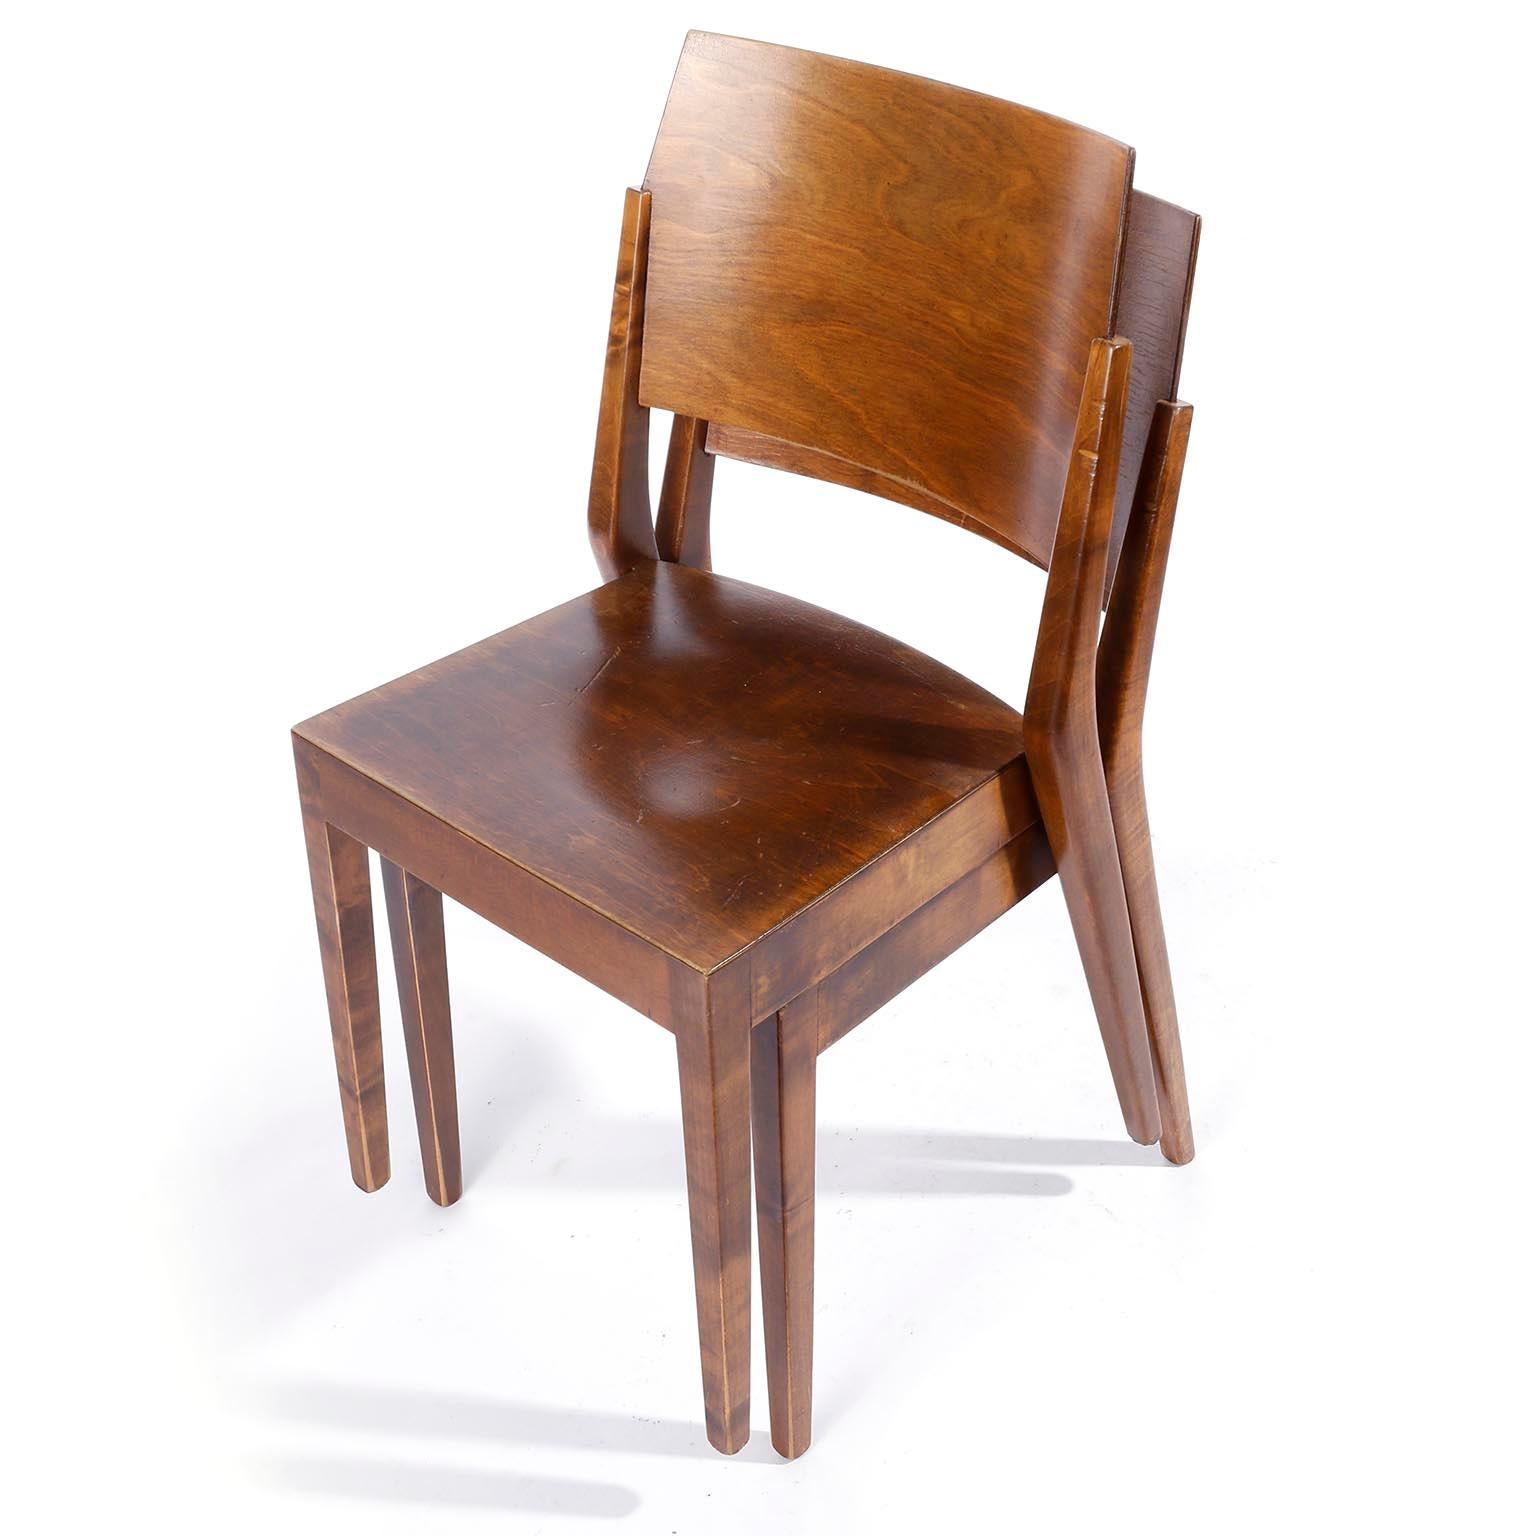 A rare set of two Viennese stacking chairs made of brown stained wood designed by Austrian architect Prof. Karl Schwanzer and manufactured by Thonet in the 1950s.
This chair was designed by Karl Schwanzer for the Werkbundausstellung in the